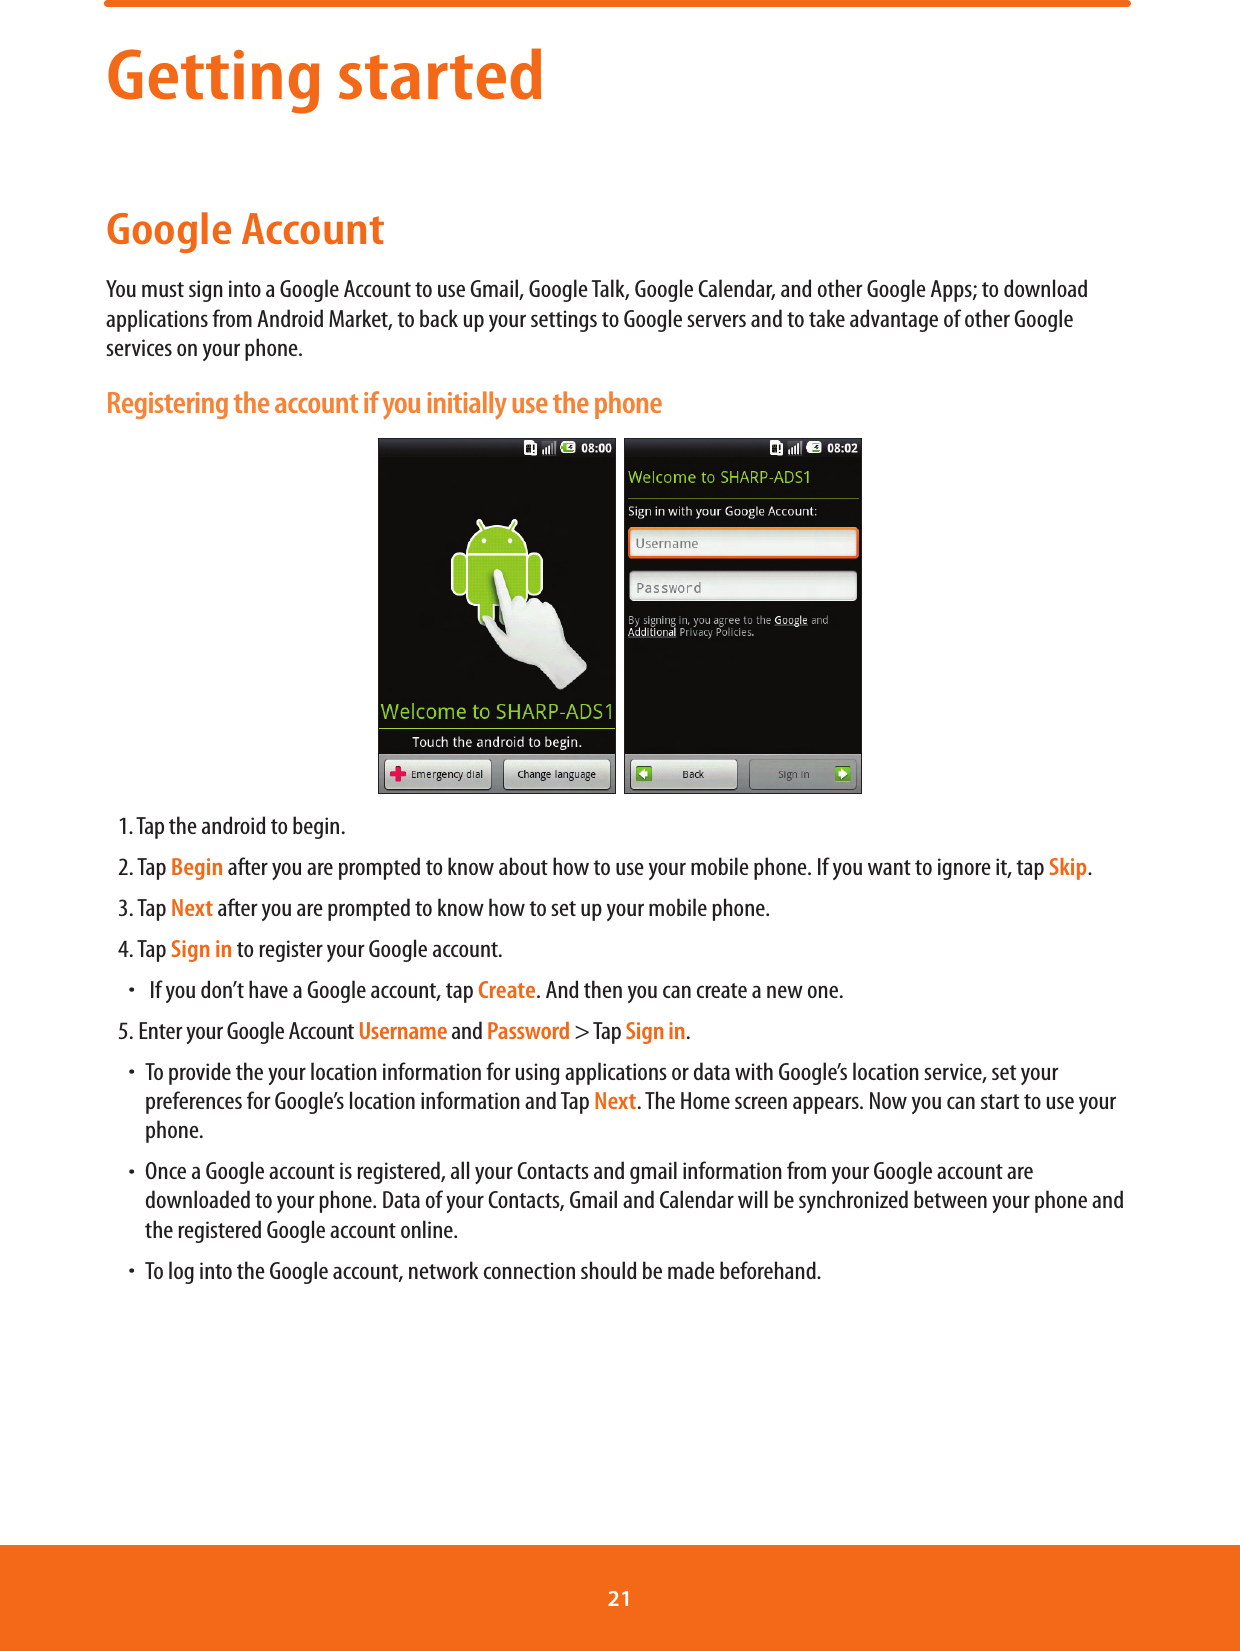 Getting startedGoogle AccountYou must sign into a Google Account to use Gmail, Google Talk, Google Calendar, and other Google Apps; to download applications from Android Market, to back up your settings to Google servers and to take advantage of other Google services on your phone.Registering the account if you initially use the phone  1. Tap the android to begin.2. Tap Begin after you are prompted to know about how to use your mobile phone. If you want to ignore it, tap Skip.3. Tap Next after you are prompted to know how to set up your mobile phone.4. Tap Sign in to register your Google account. ħ If you don’t have a Google account, tap Create. And then you can create a new one.5. Enter your Google Account Username and Password &gt; Tap Sign in.ħTo provide the your location information for using applications or data with Google’s location service, set your preferences for Google’s location information and Tap Next. The Home screen appears. Now you can start to use your phone.ħOnce a Google account is registered, all your Contacts and gmail information from your Google account are downloaded to your phone. Data of your Contacts, Gmail and Calendar will be synchronized between your phone and the registered Google account online.ħTo log into the Google account, network connection should be made beforehand.21 